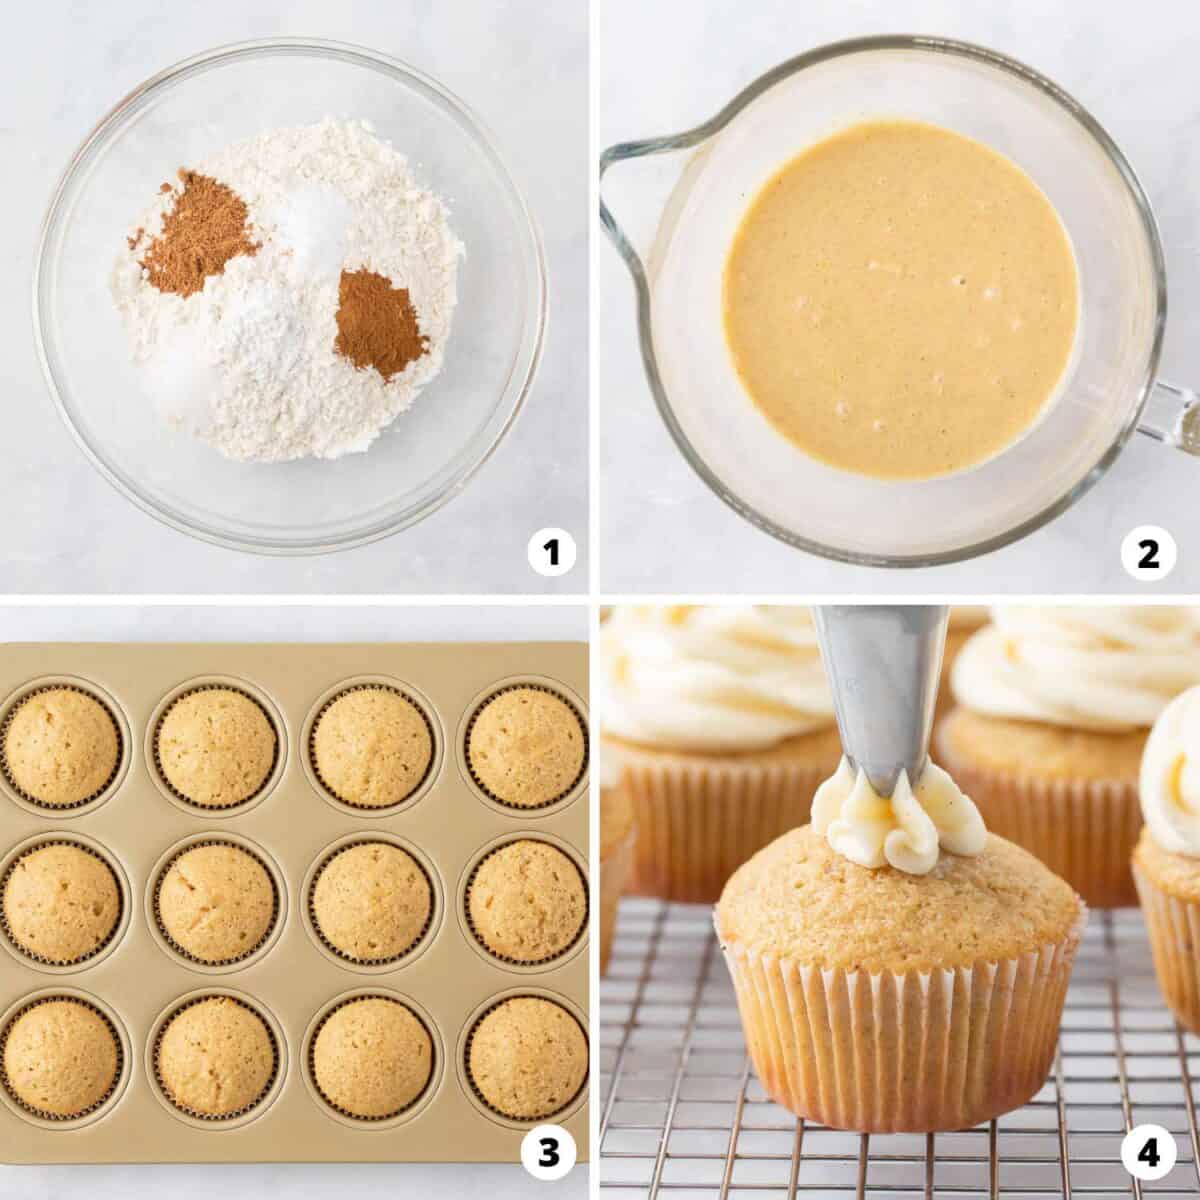 Showing how to make eggnog cupcakes in a 4 step collage.